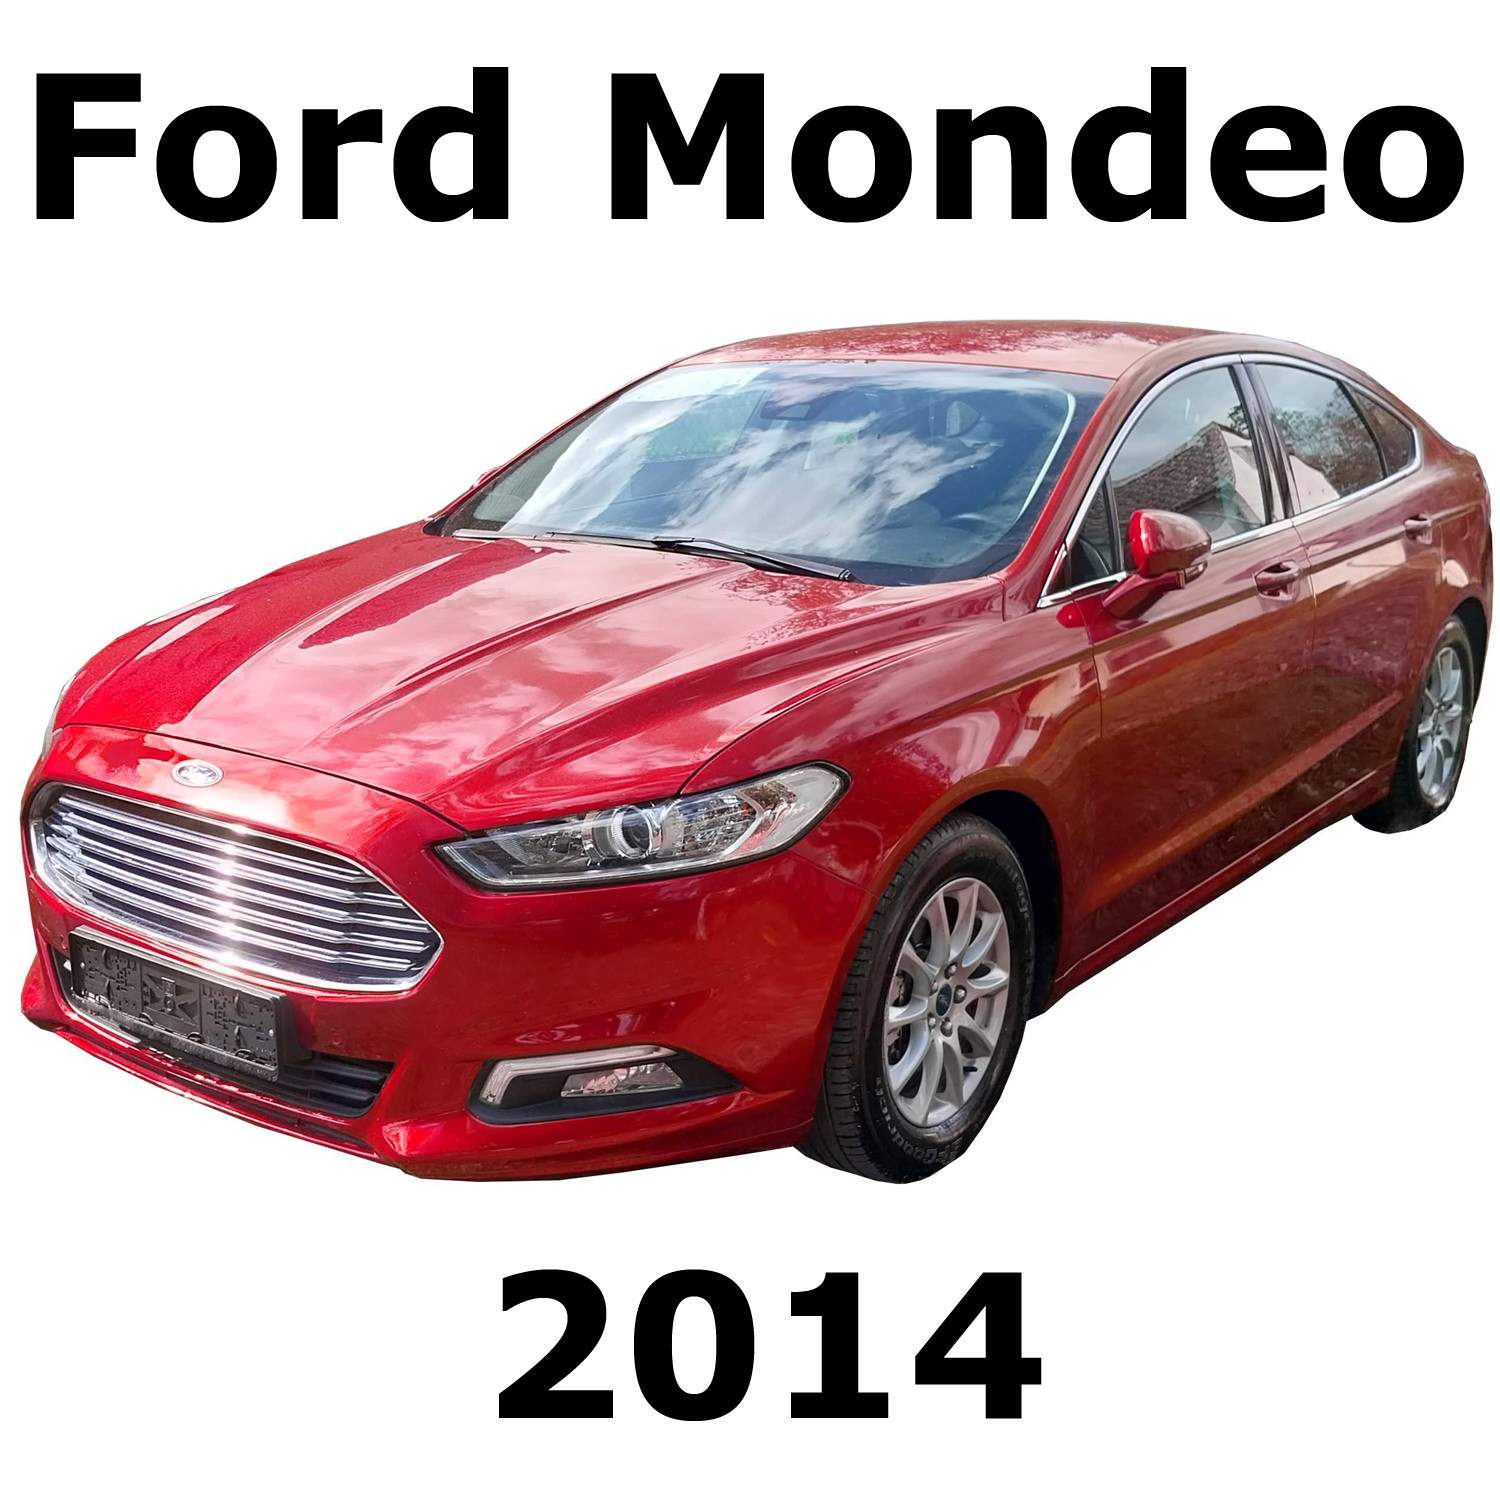 A ford mondeo 2014 with the words ford mondeo 2014.